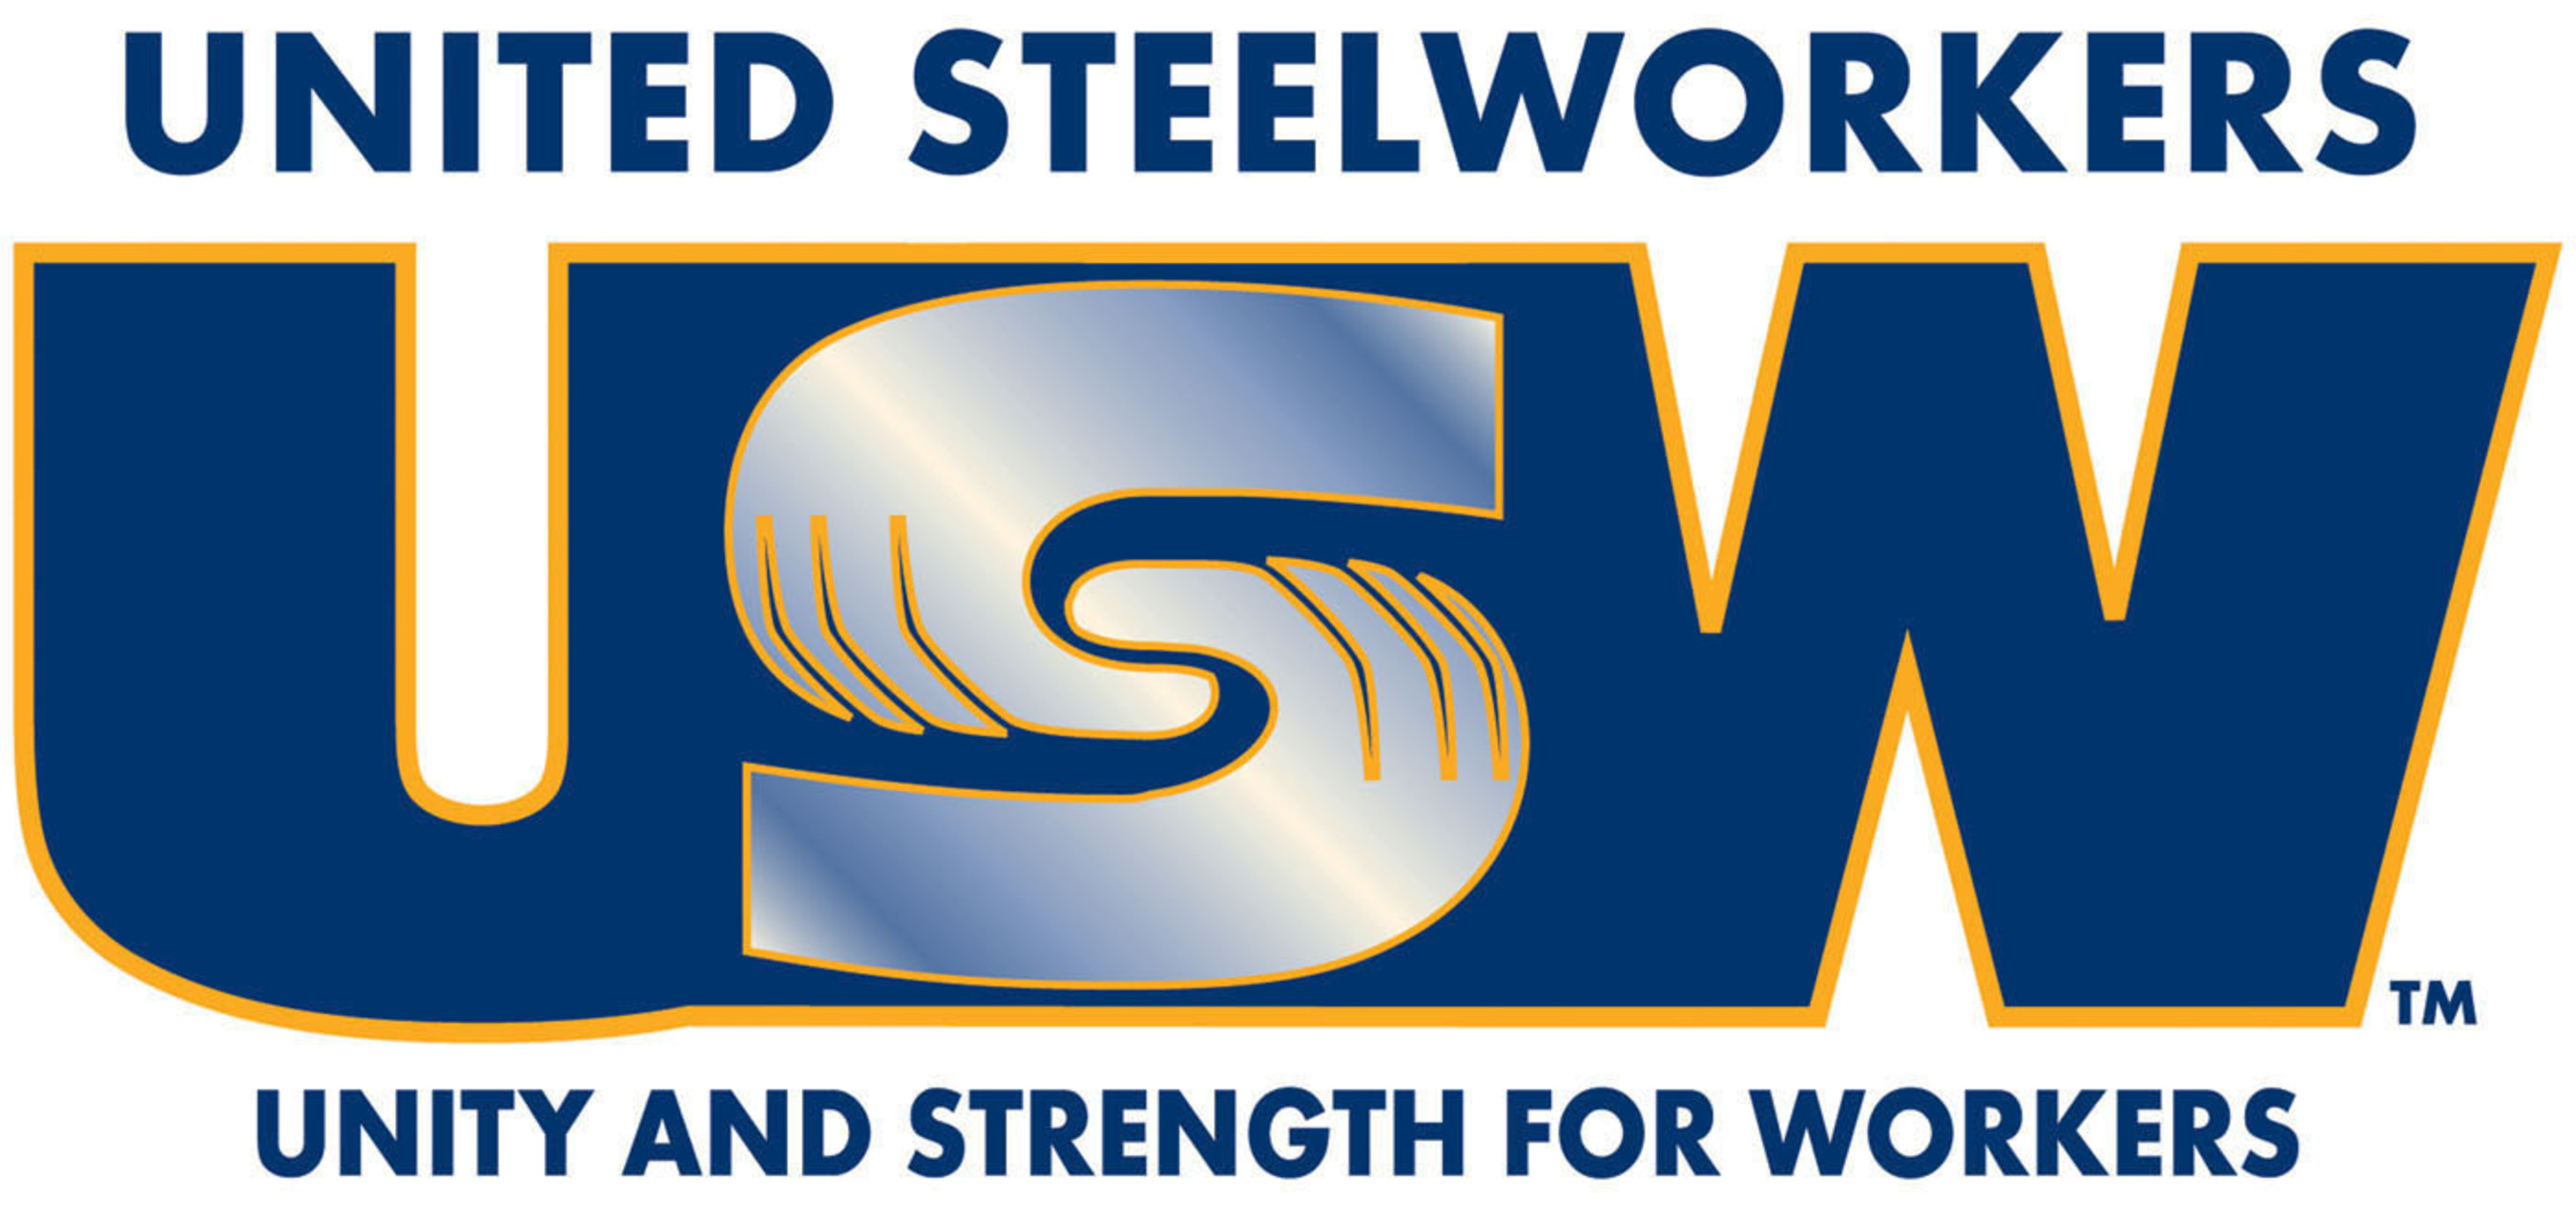 United Steelworkers.